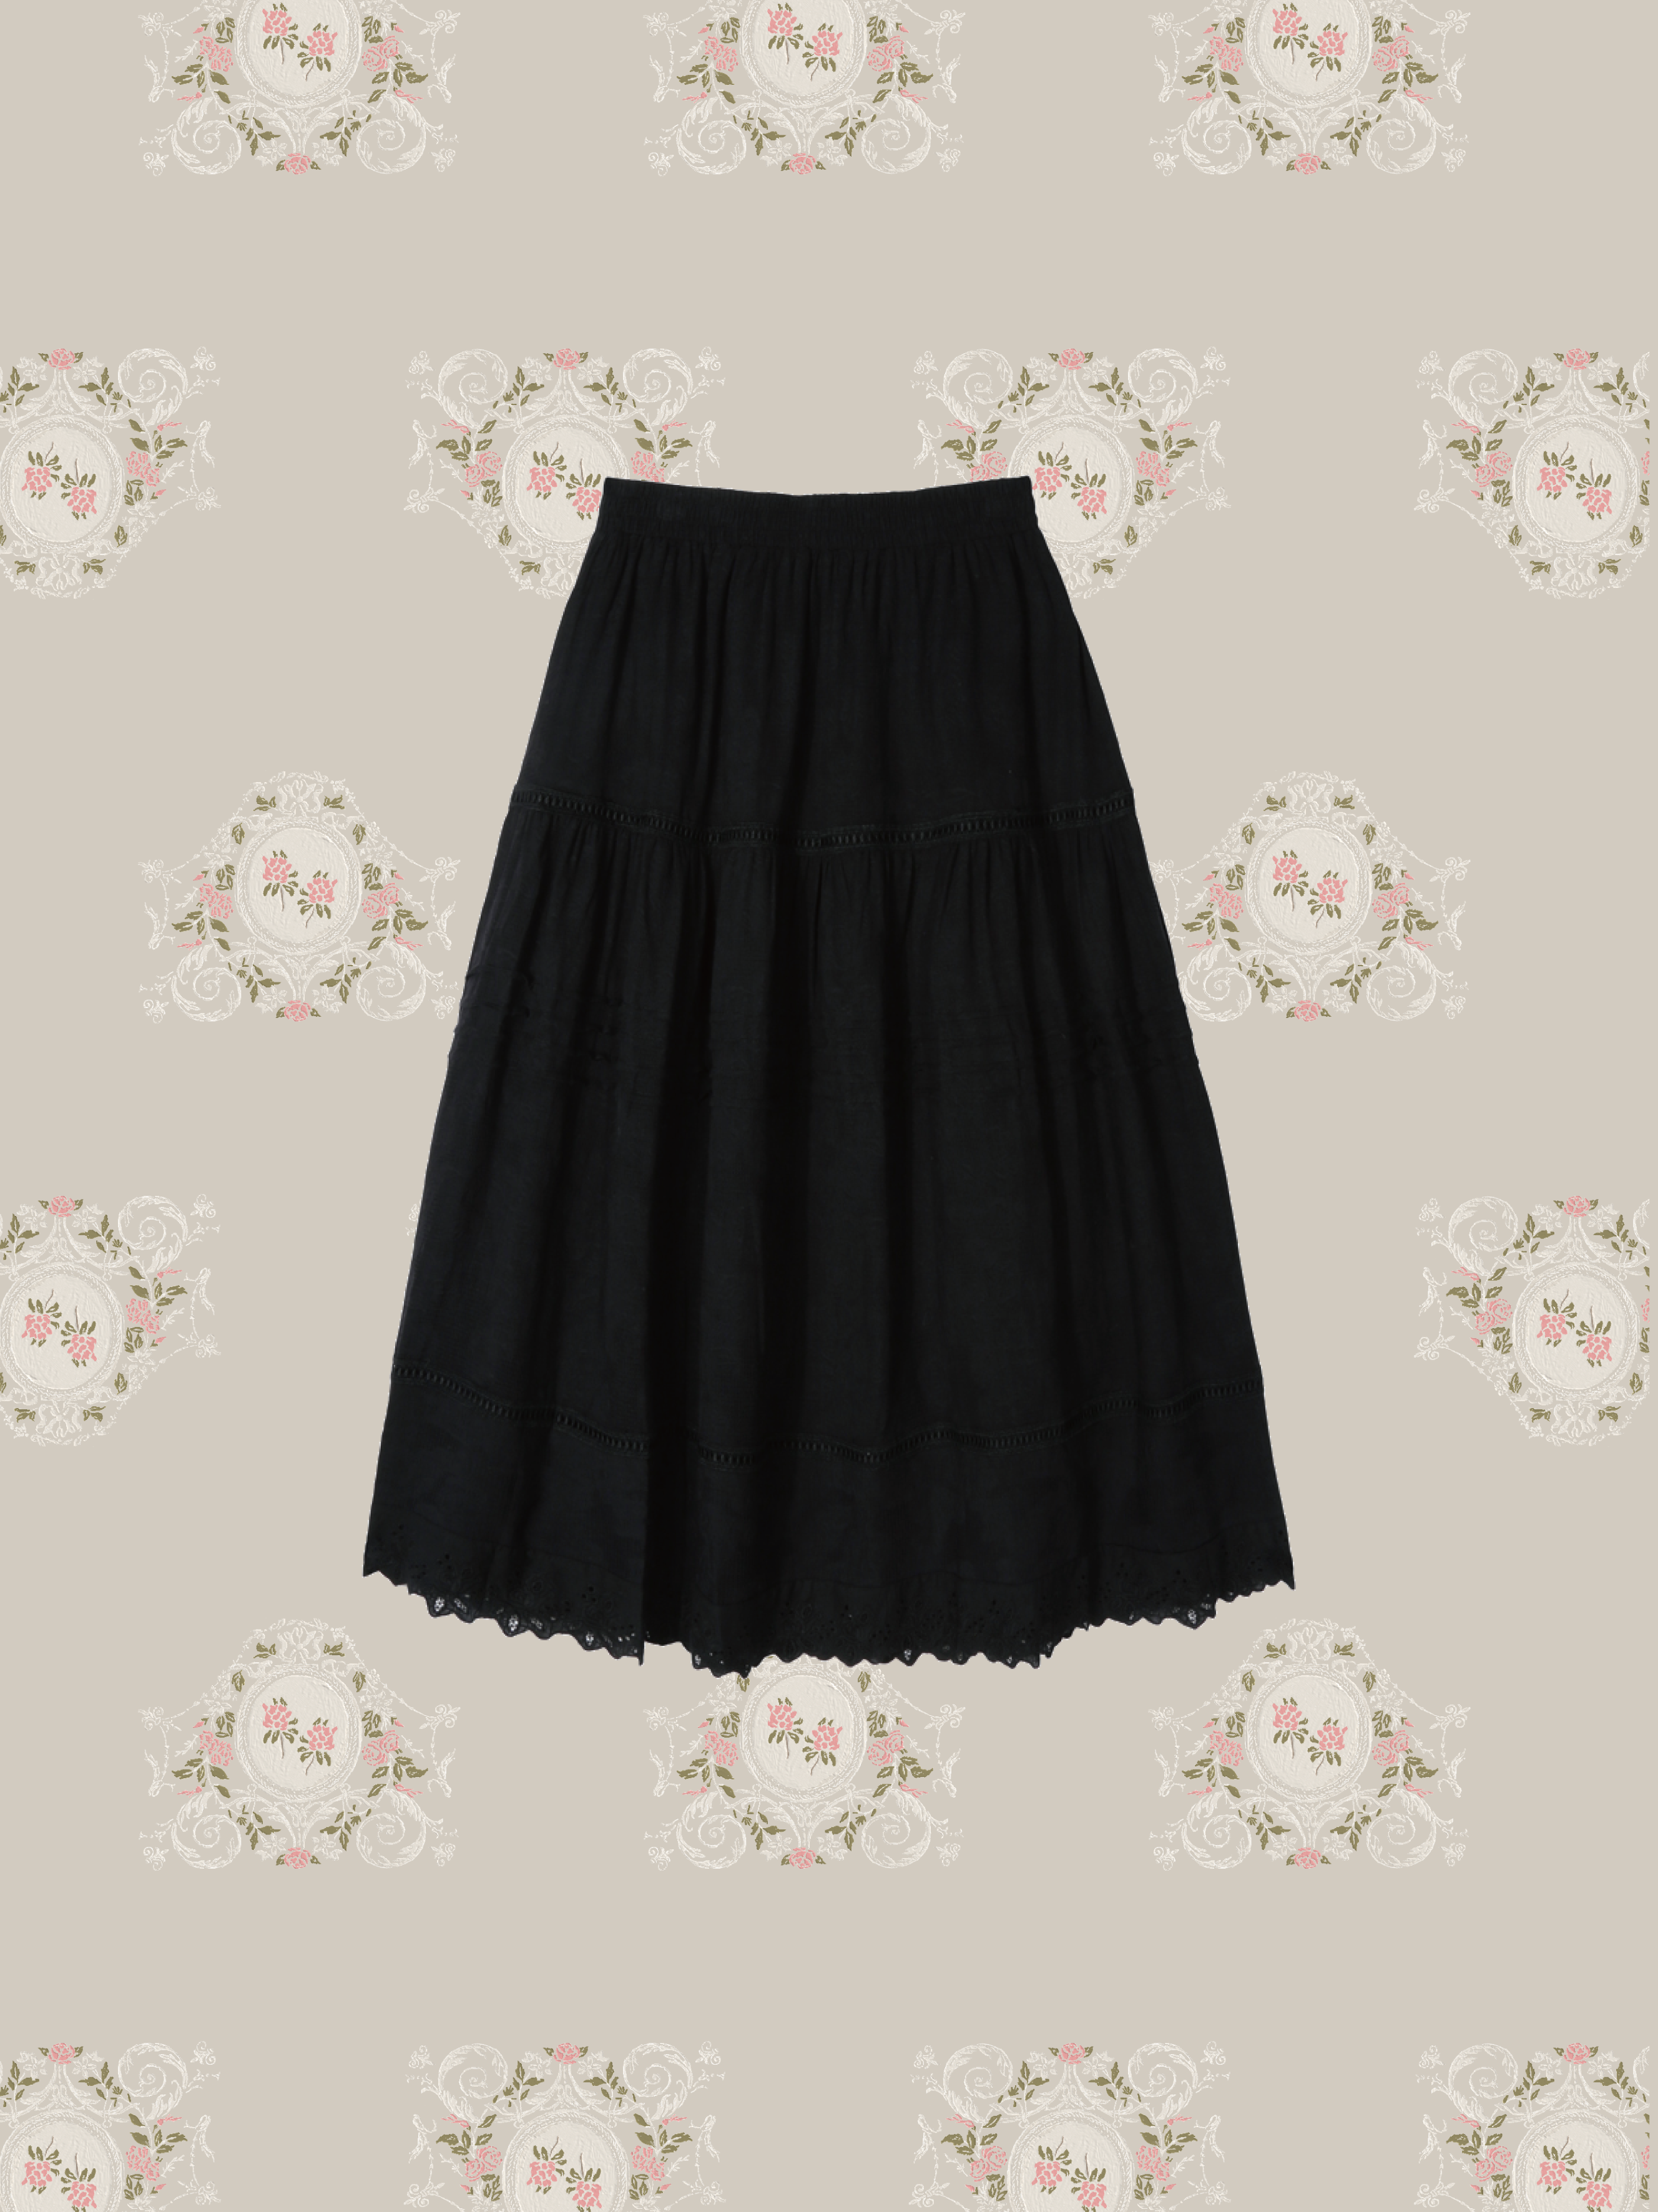 Flare Hollow Out Embroidery Skirt/フレア刺繍スカート